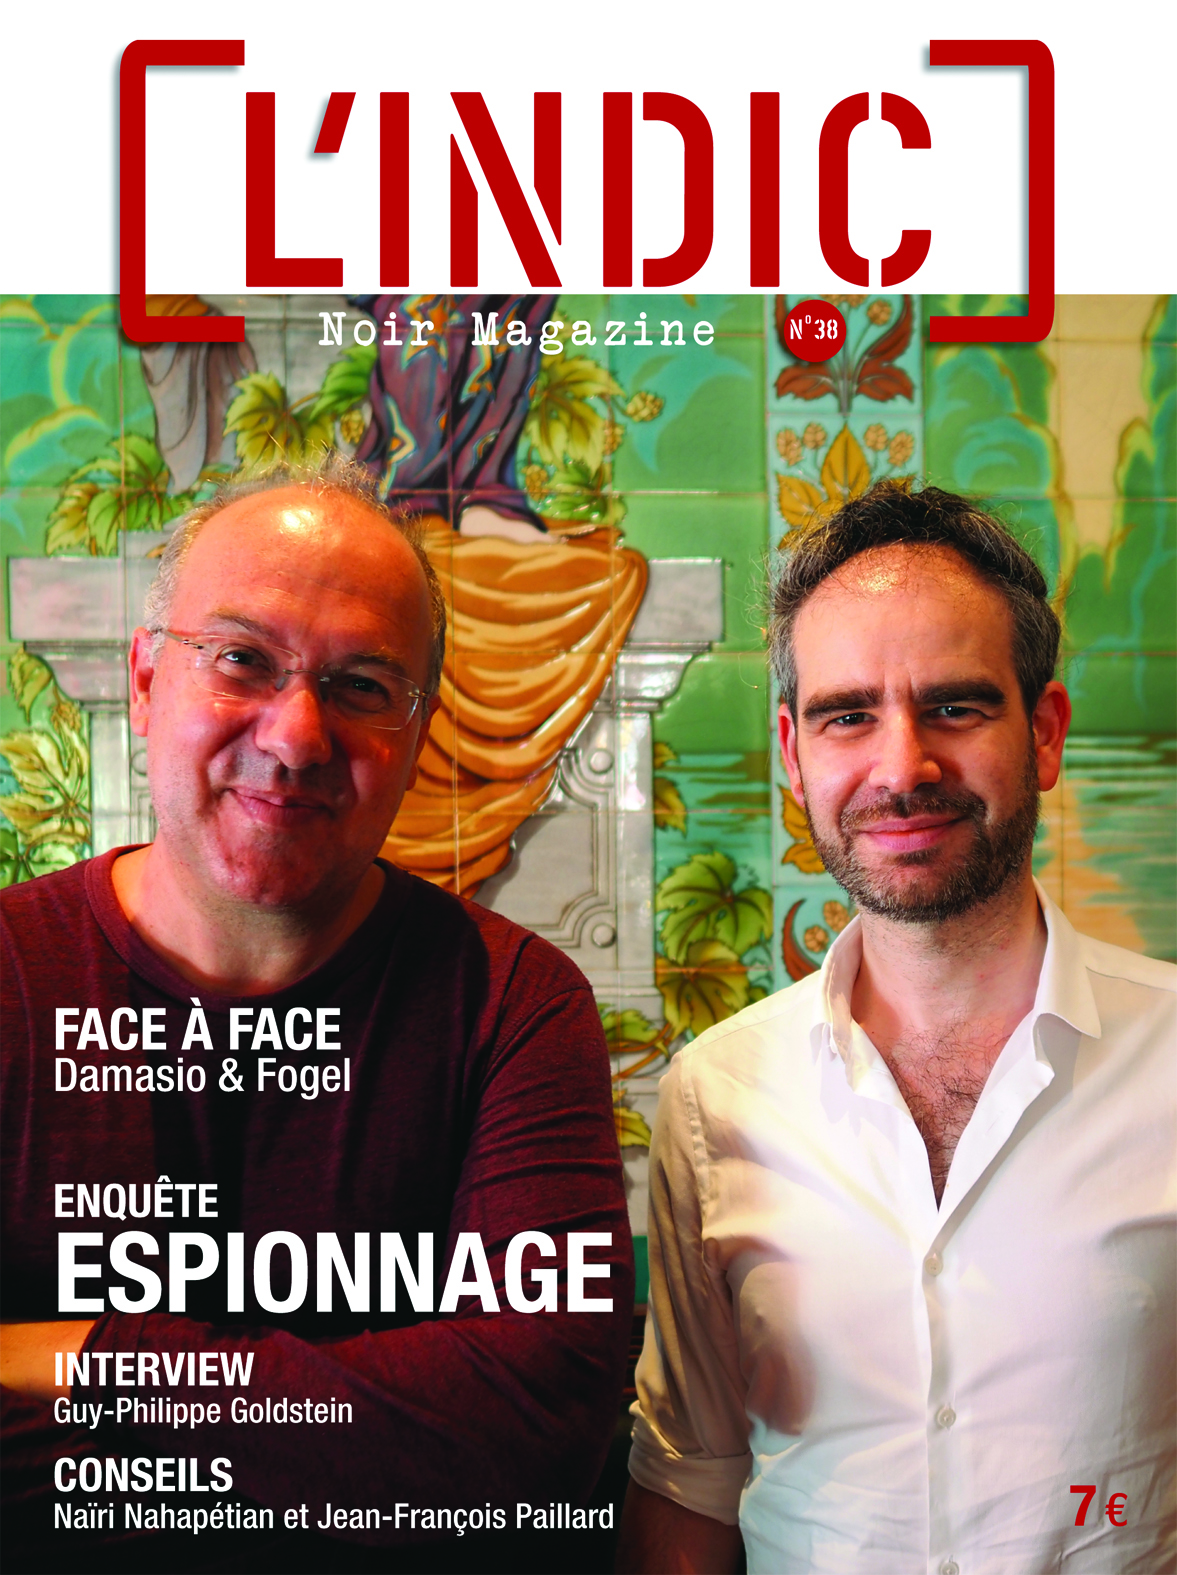 L'Indic n°38, sommaire